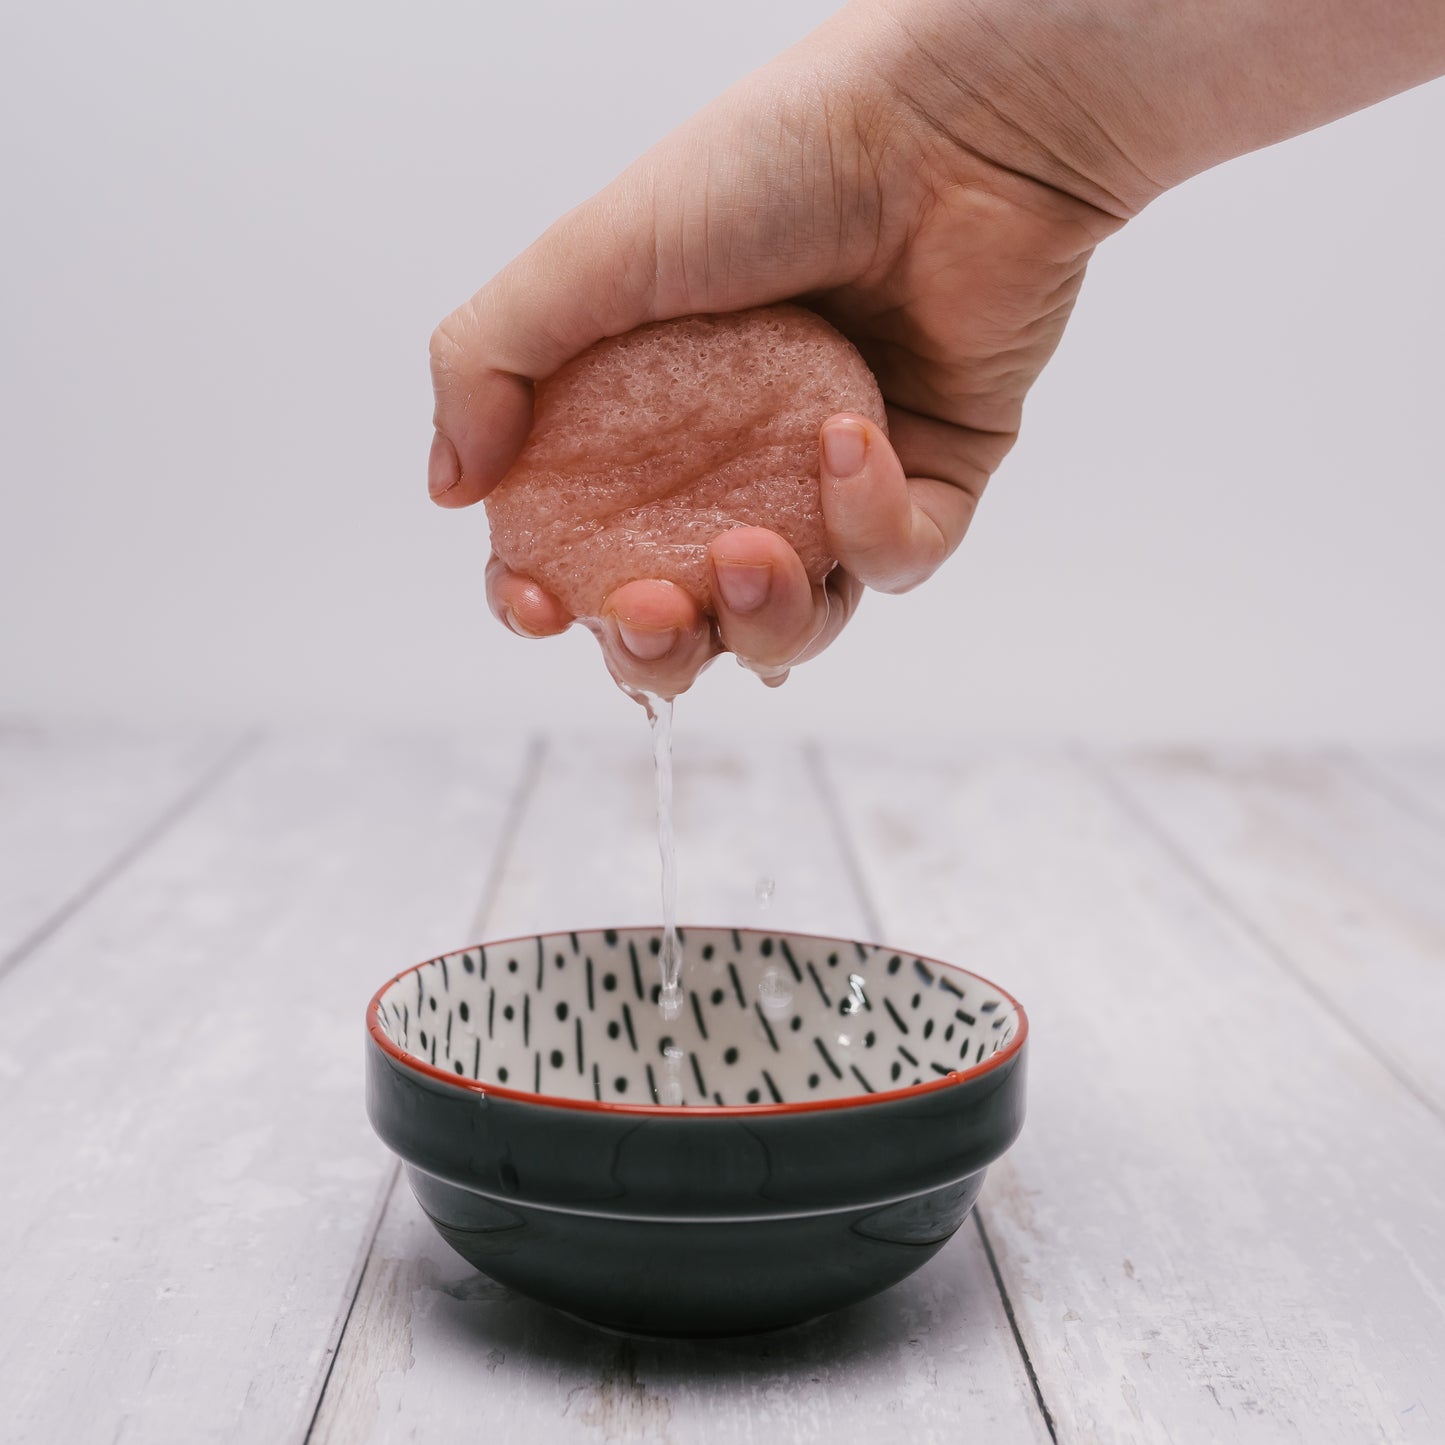 pale pink konjac sponge being wrung over a bowl